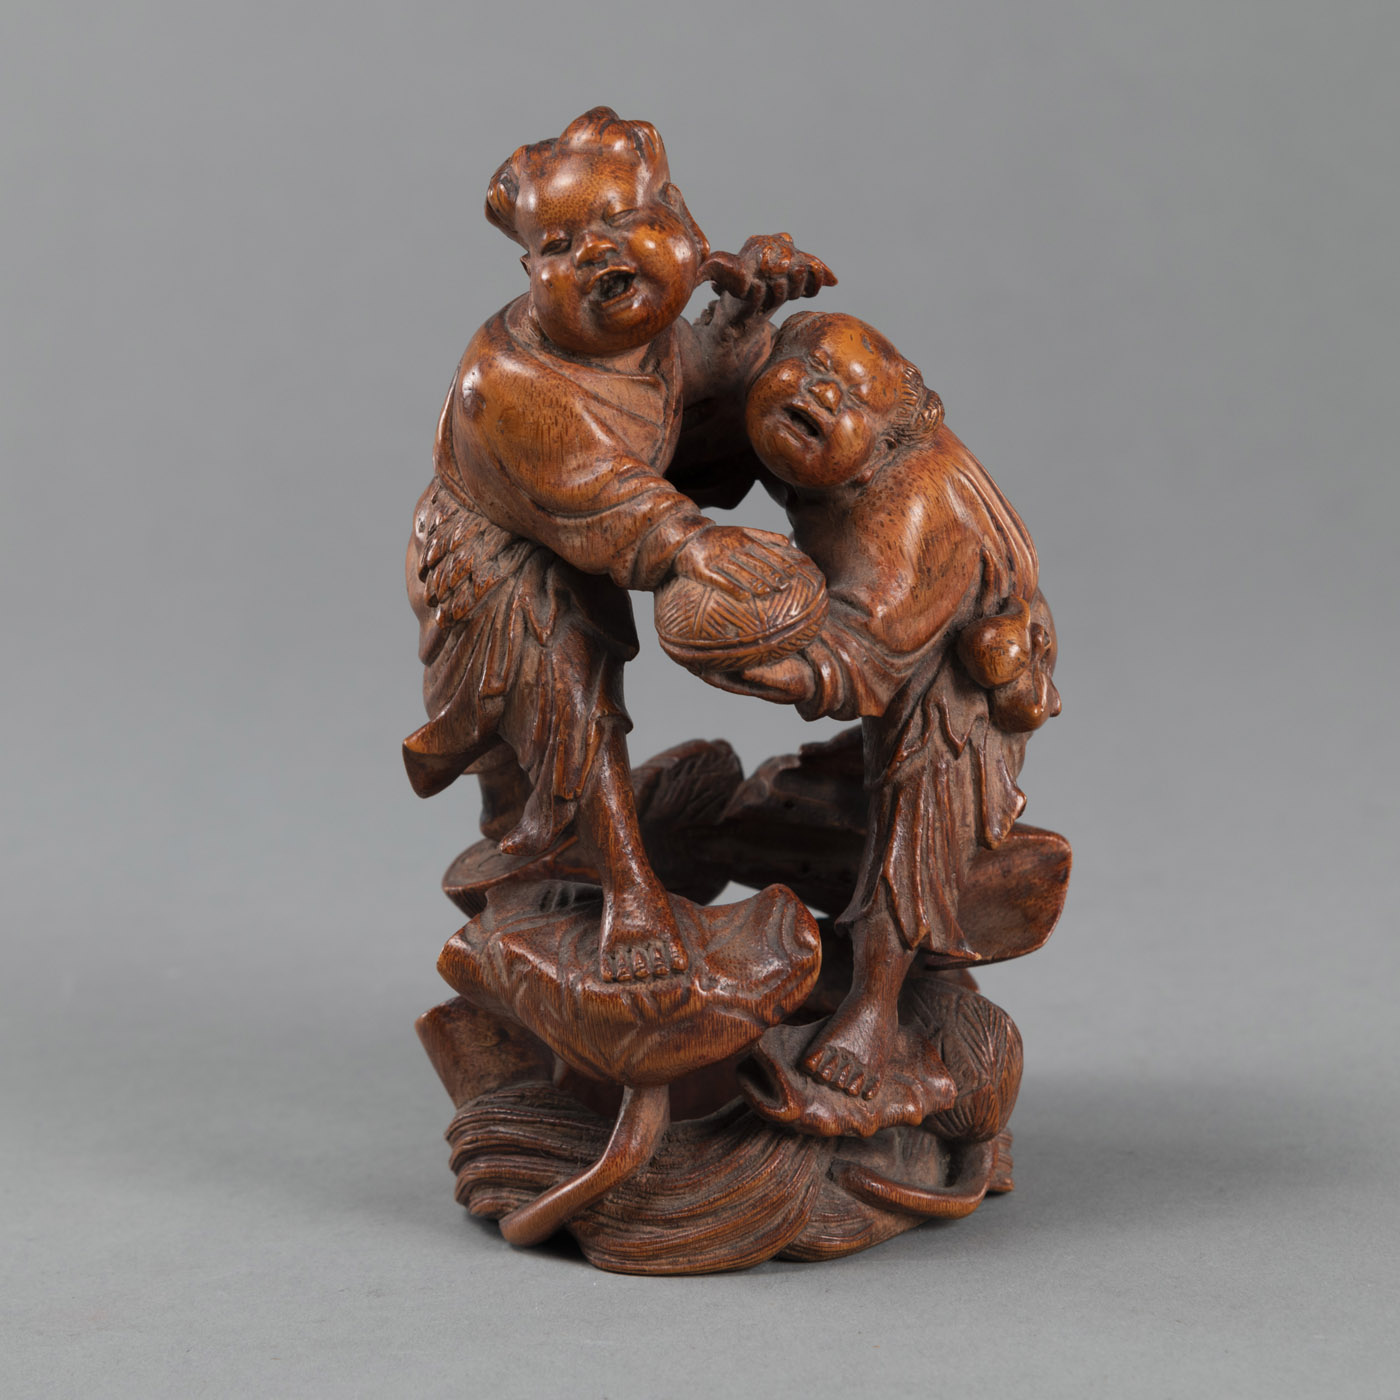 <b>A BAMBOO CARVING DEPICTING THE TWO IMMORTALS 'HE-HE ER XIAN' STANDING ON LOTUS</b>